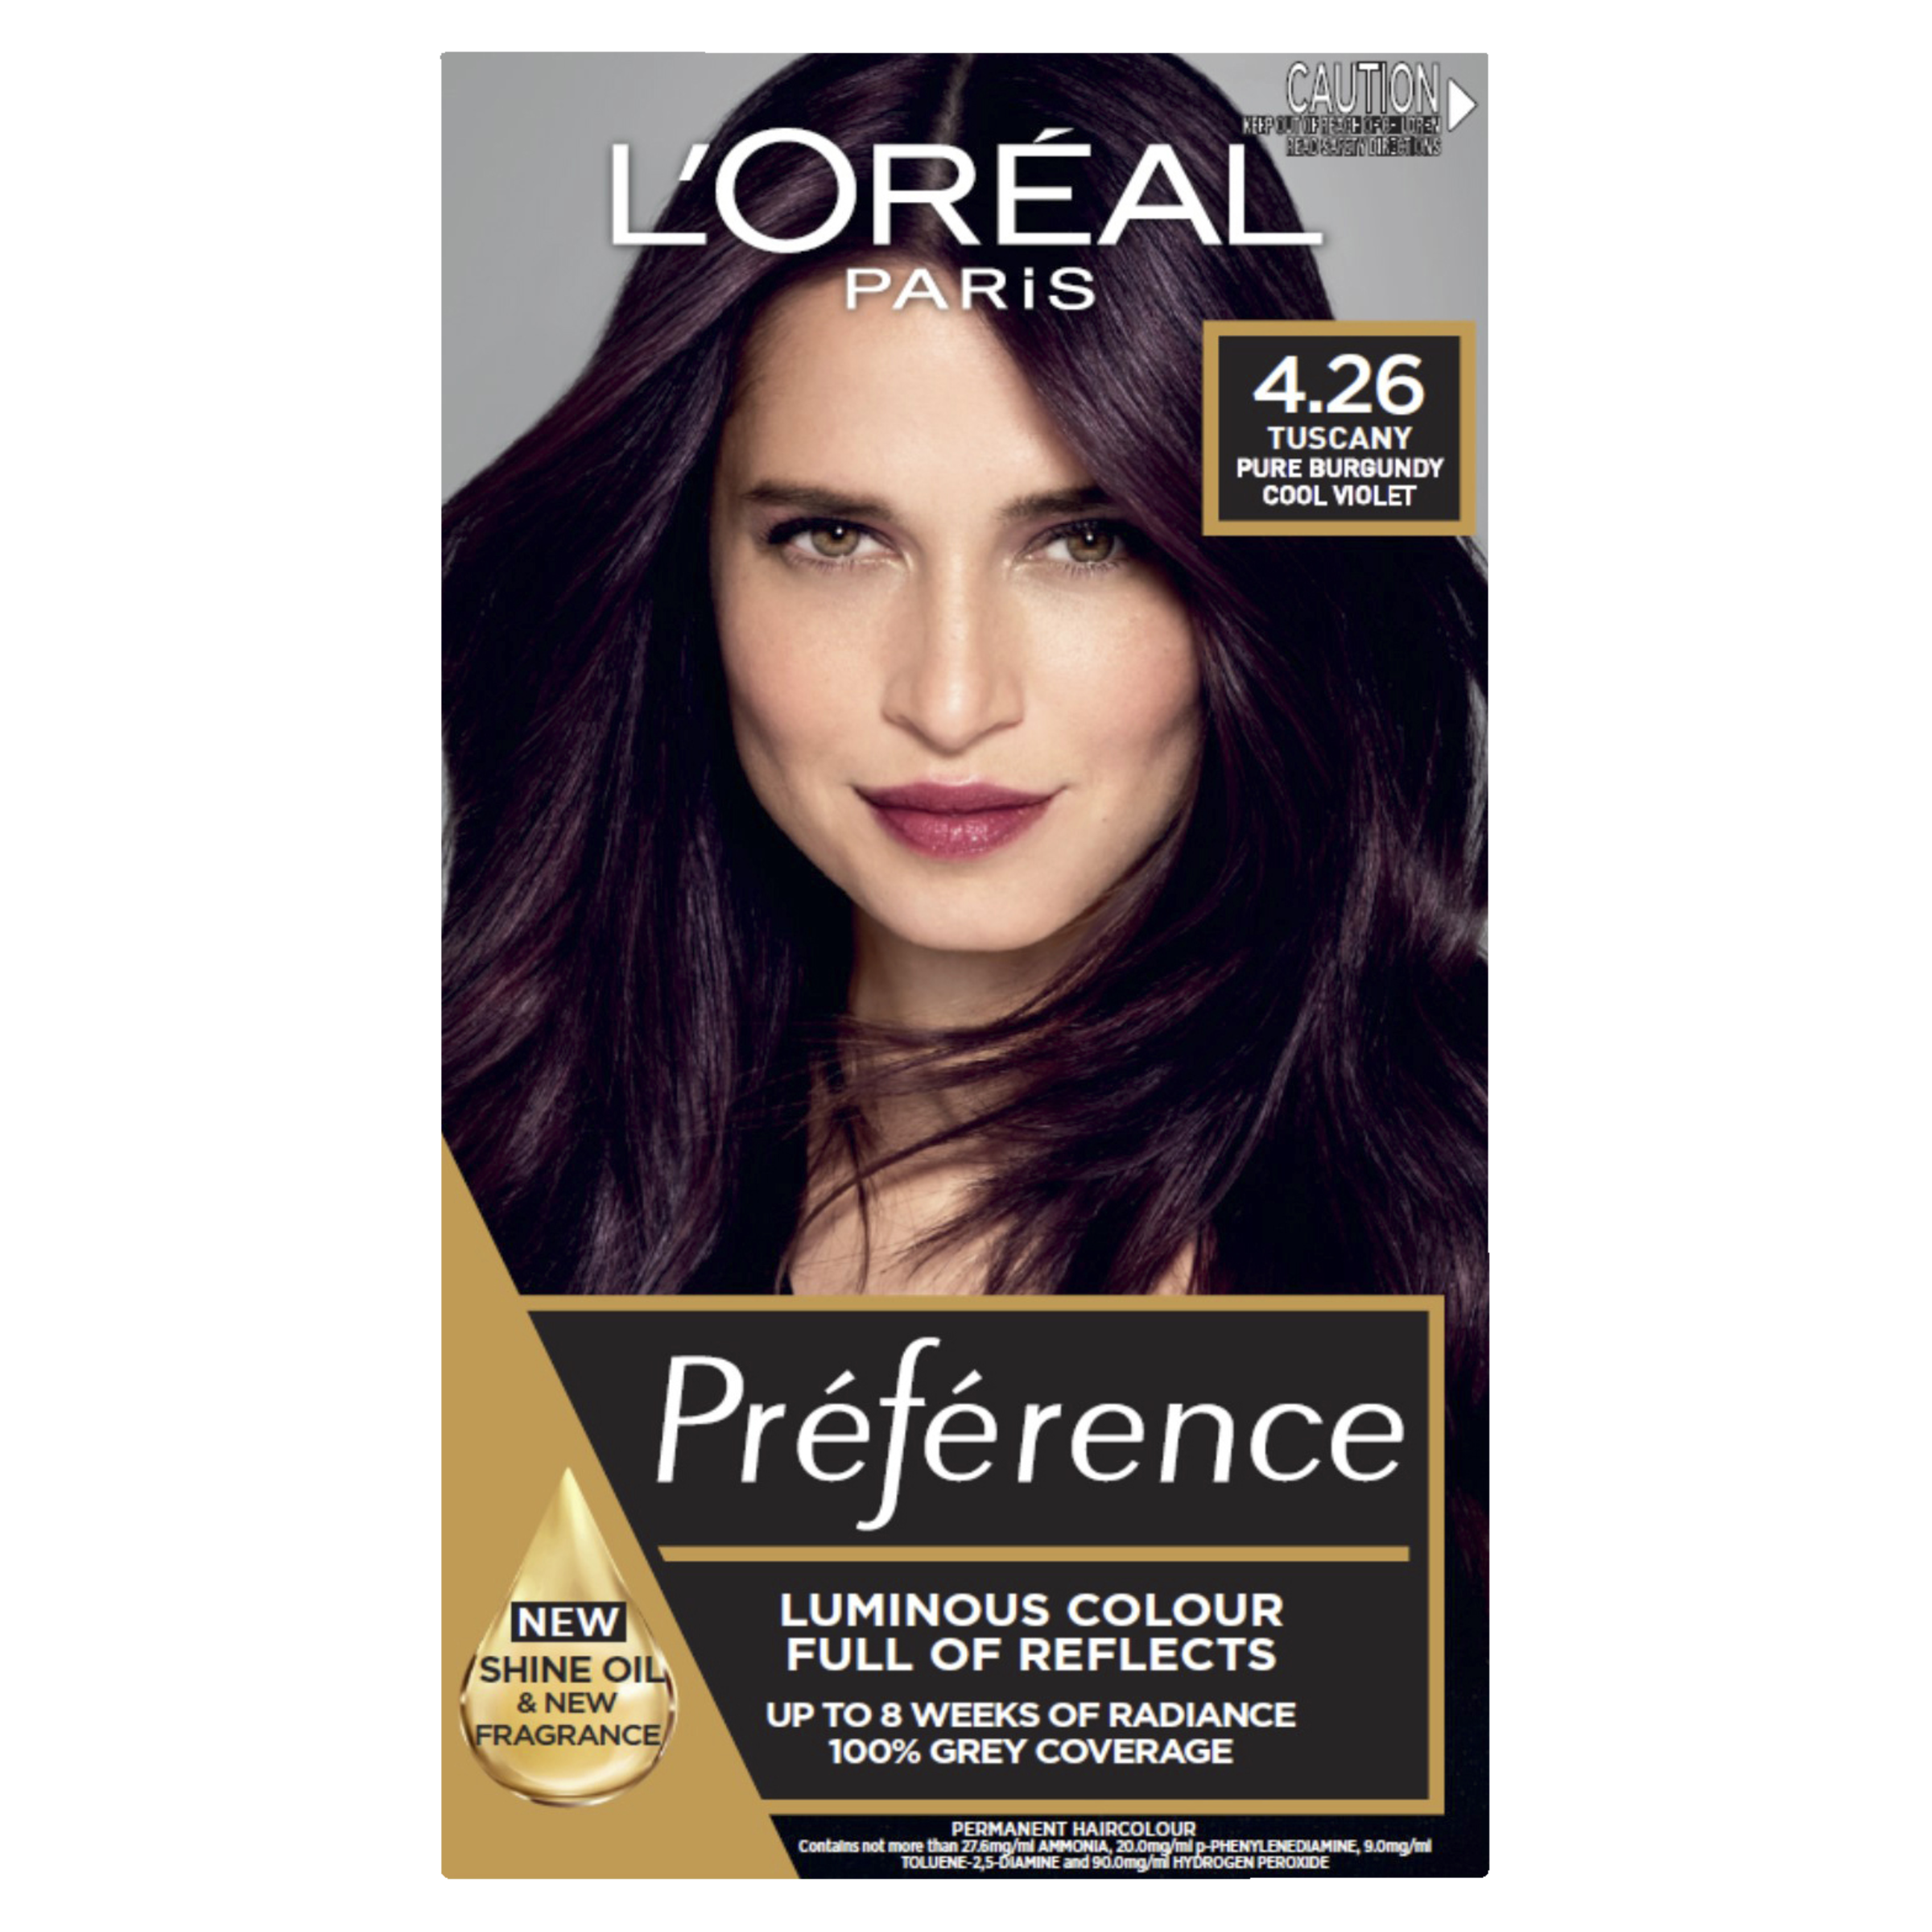 L'Oreal Paris Preference 4.26 Tuscany Pure Burgundy Cool Violet